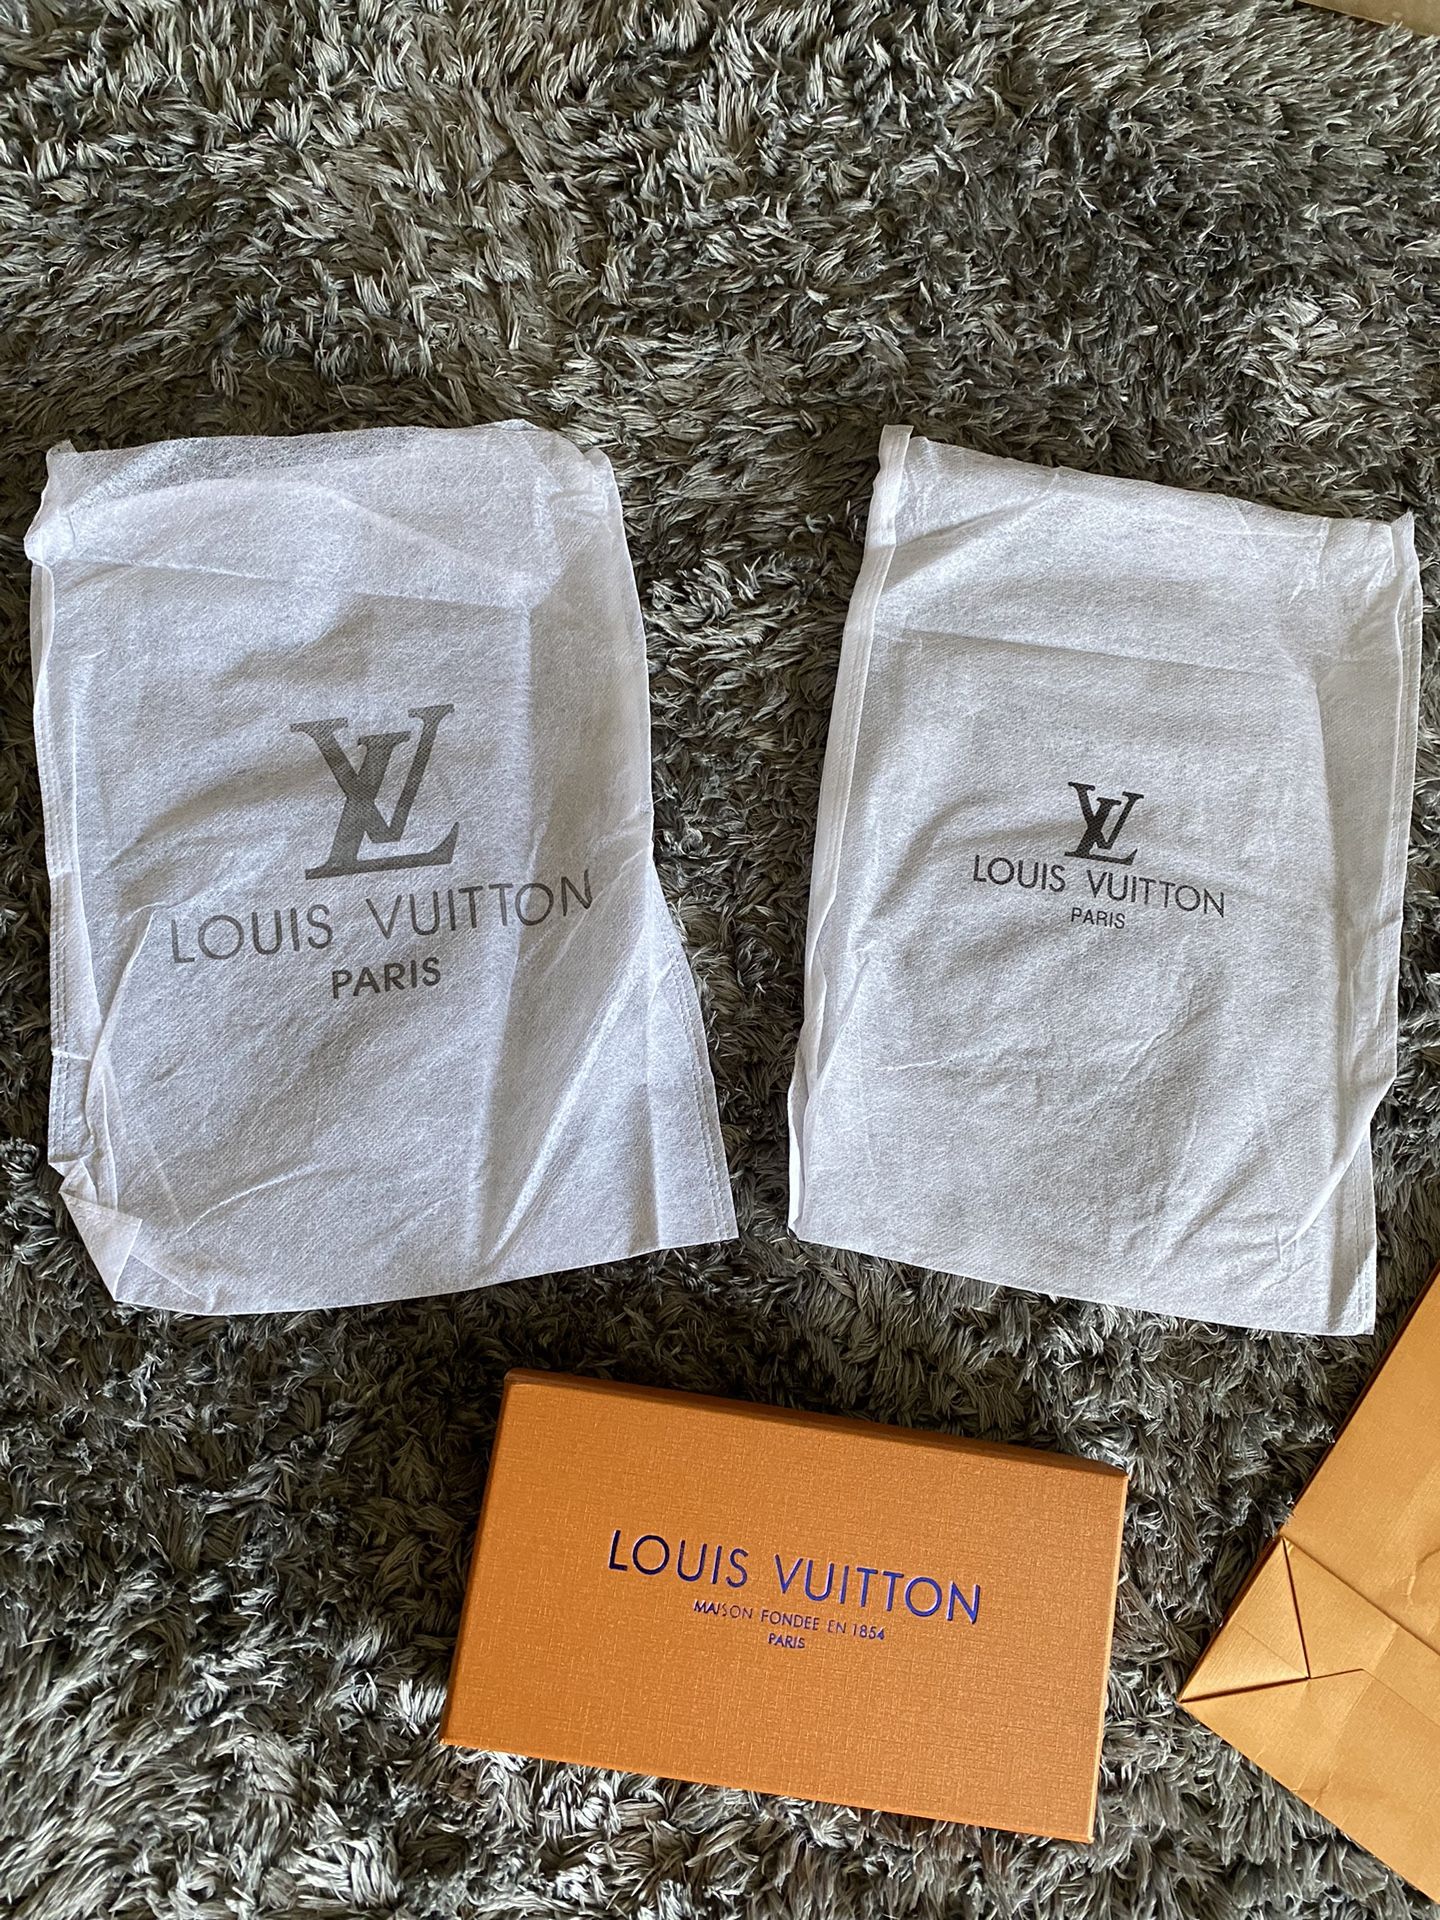 Authentic Louis Vuitton Box LV 10x9.5 for Sale in San Diego, CA - OfferUp